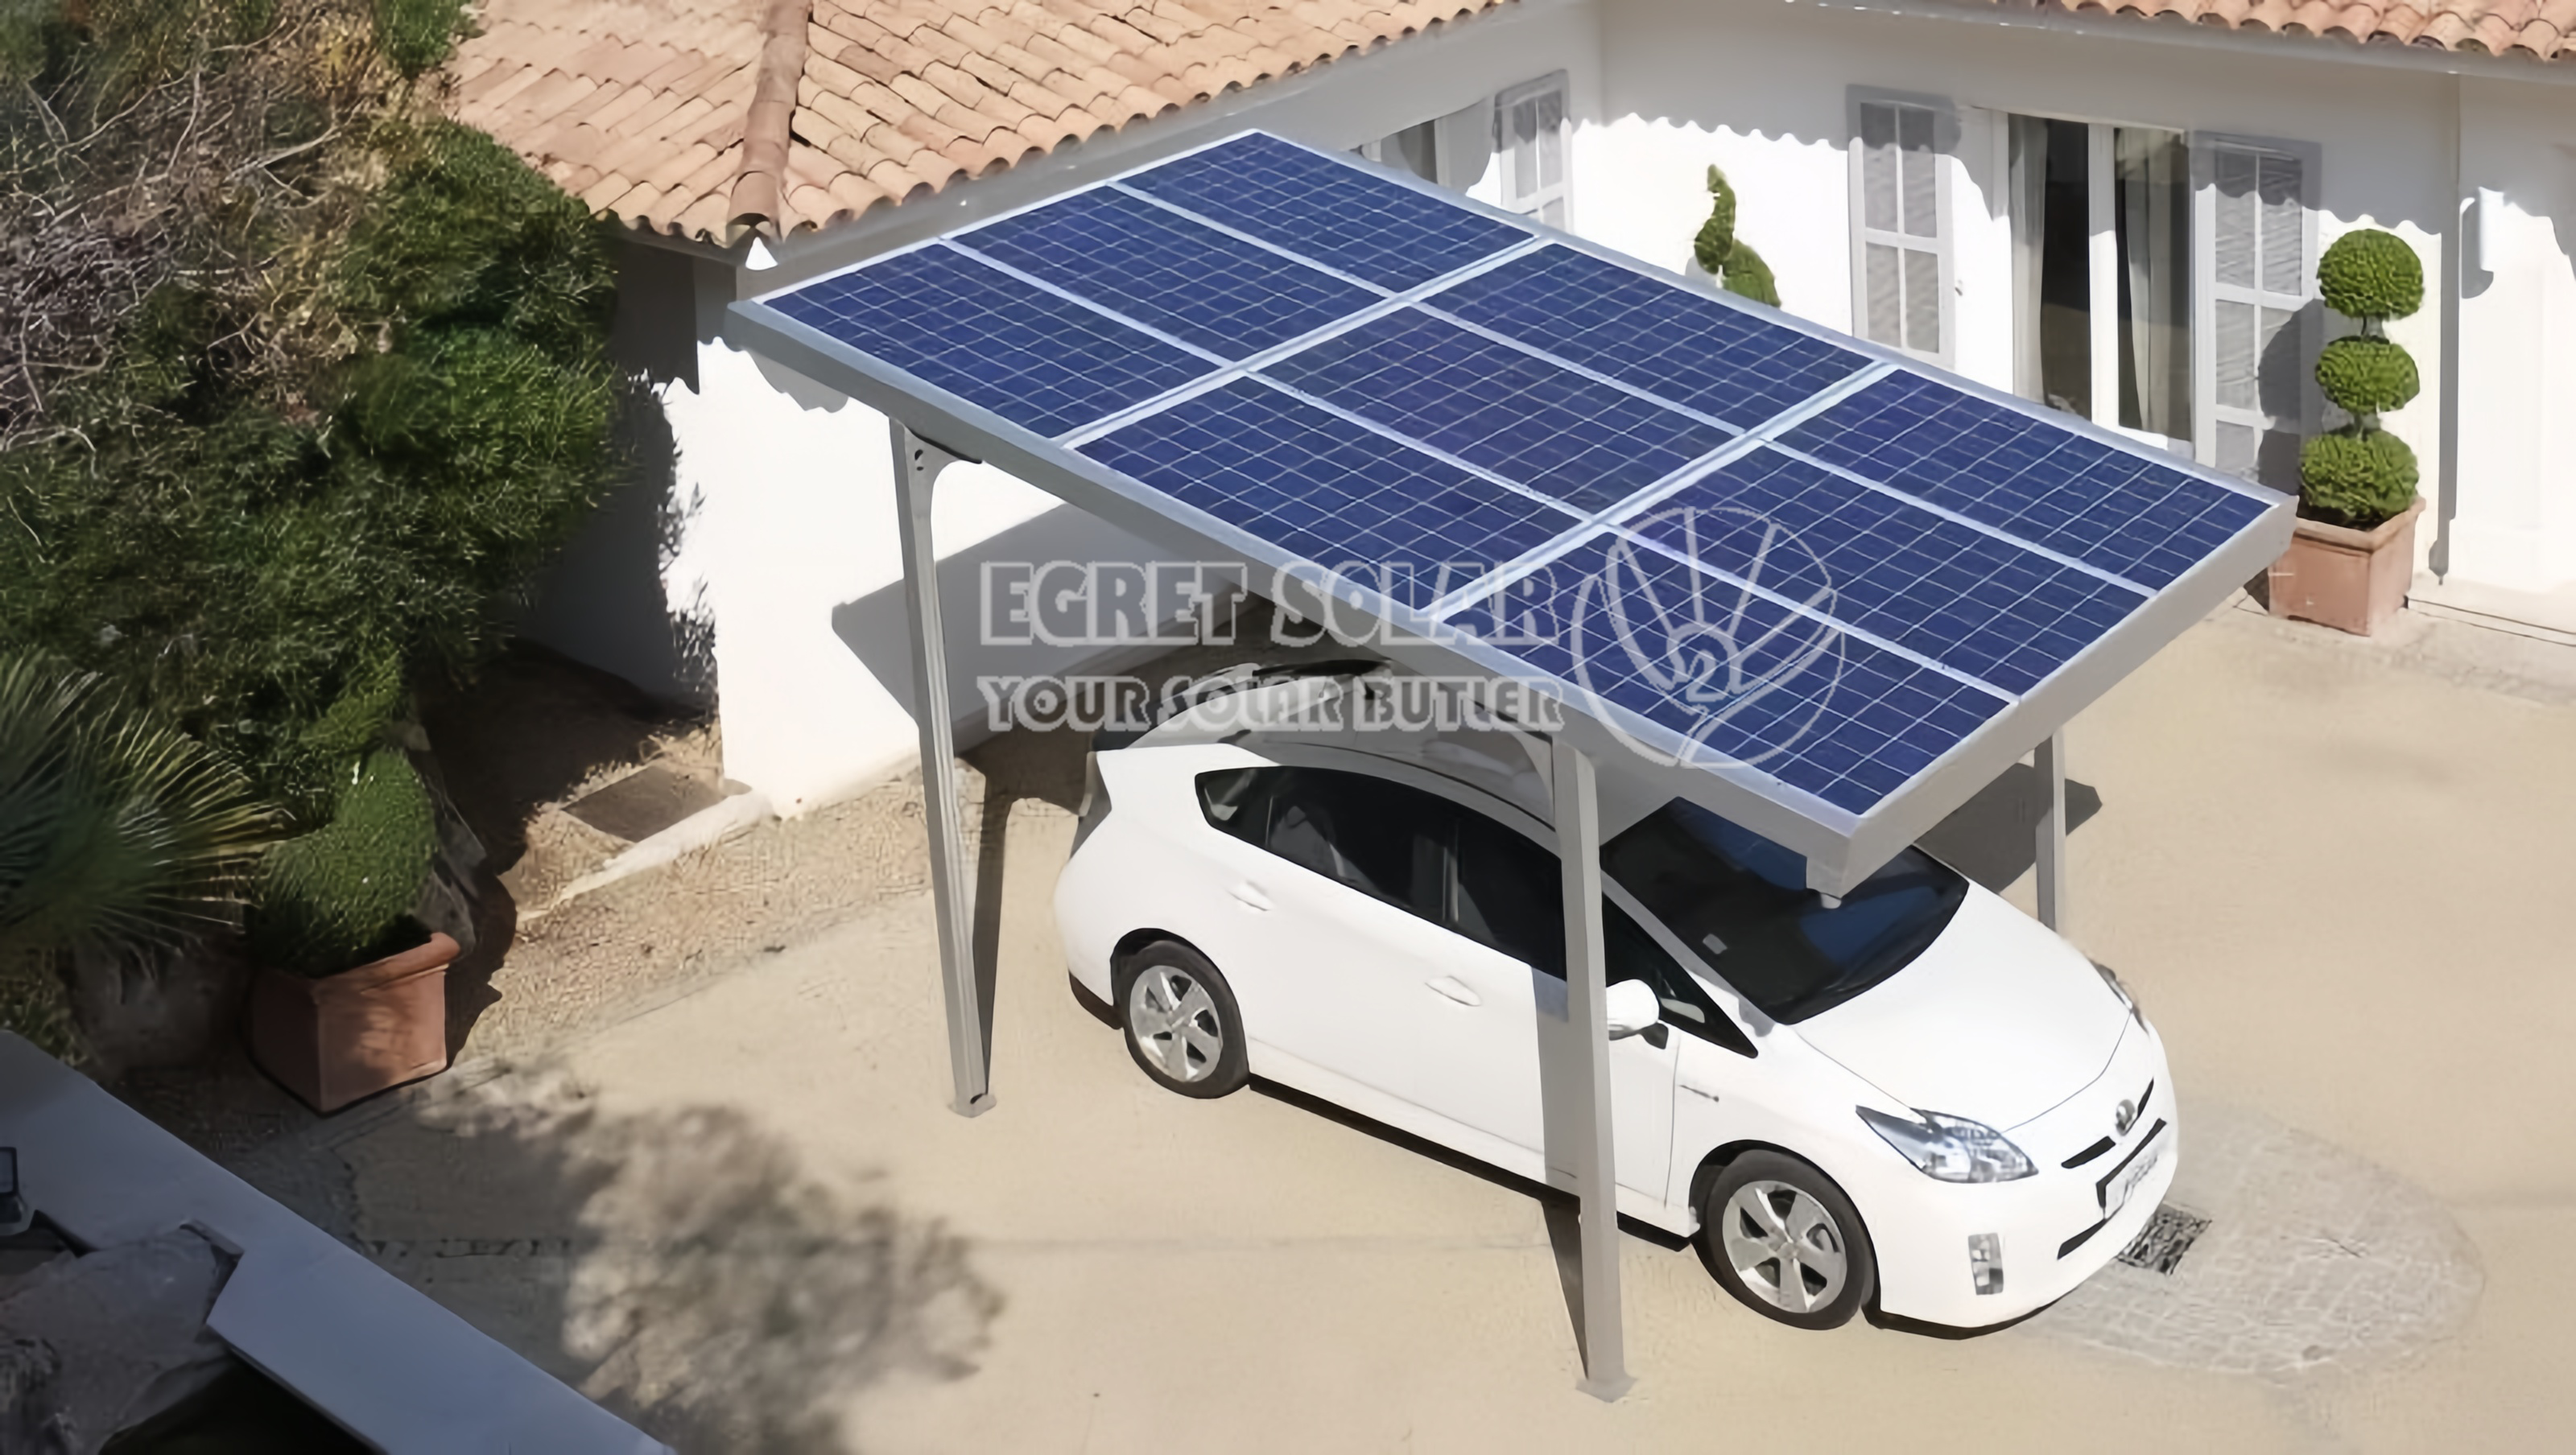 Innovative Waterproofing Carport Solar Mounting System Solves Traditional Challenges